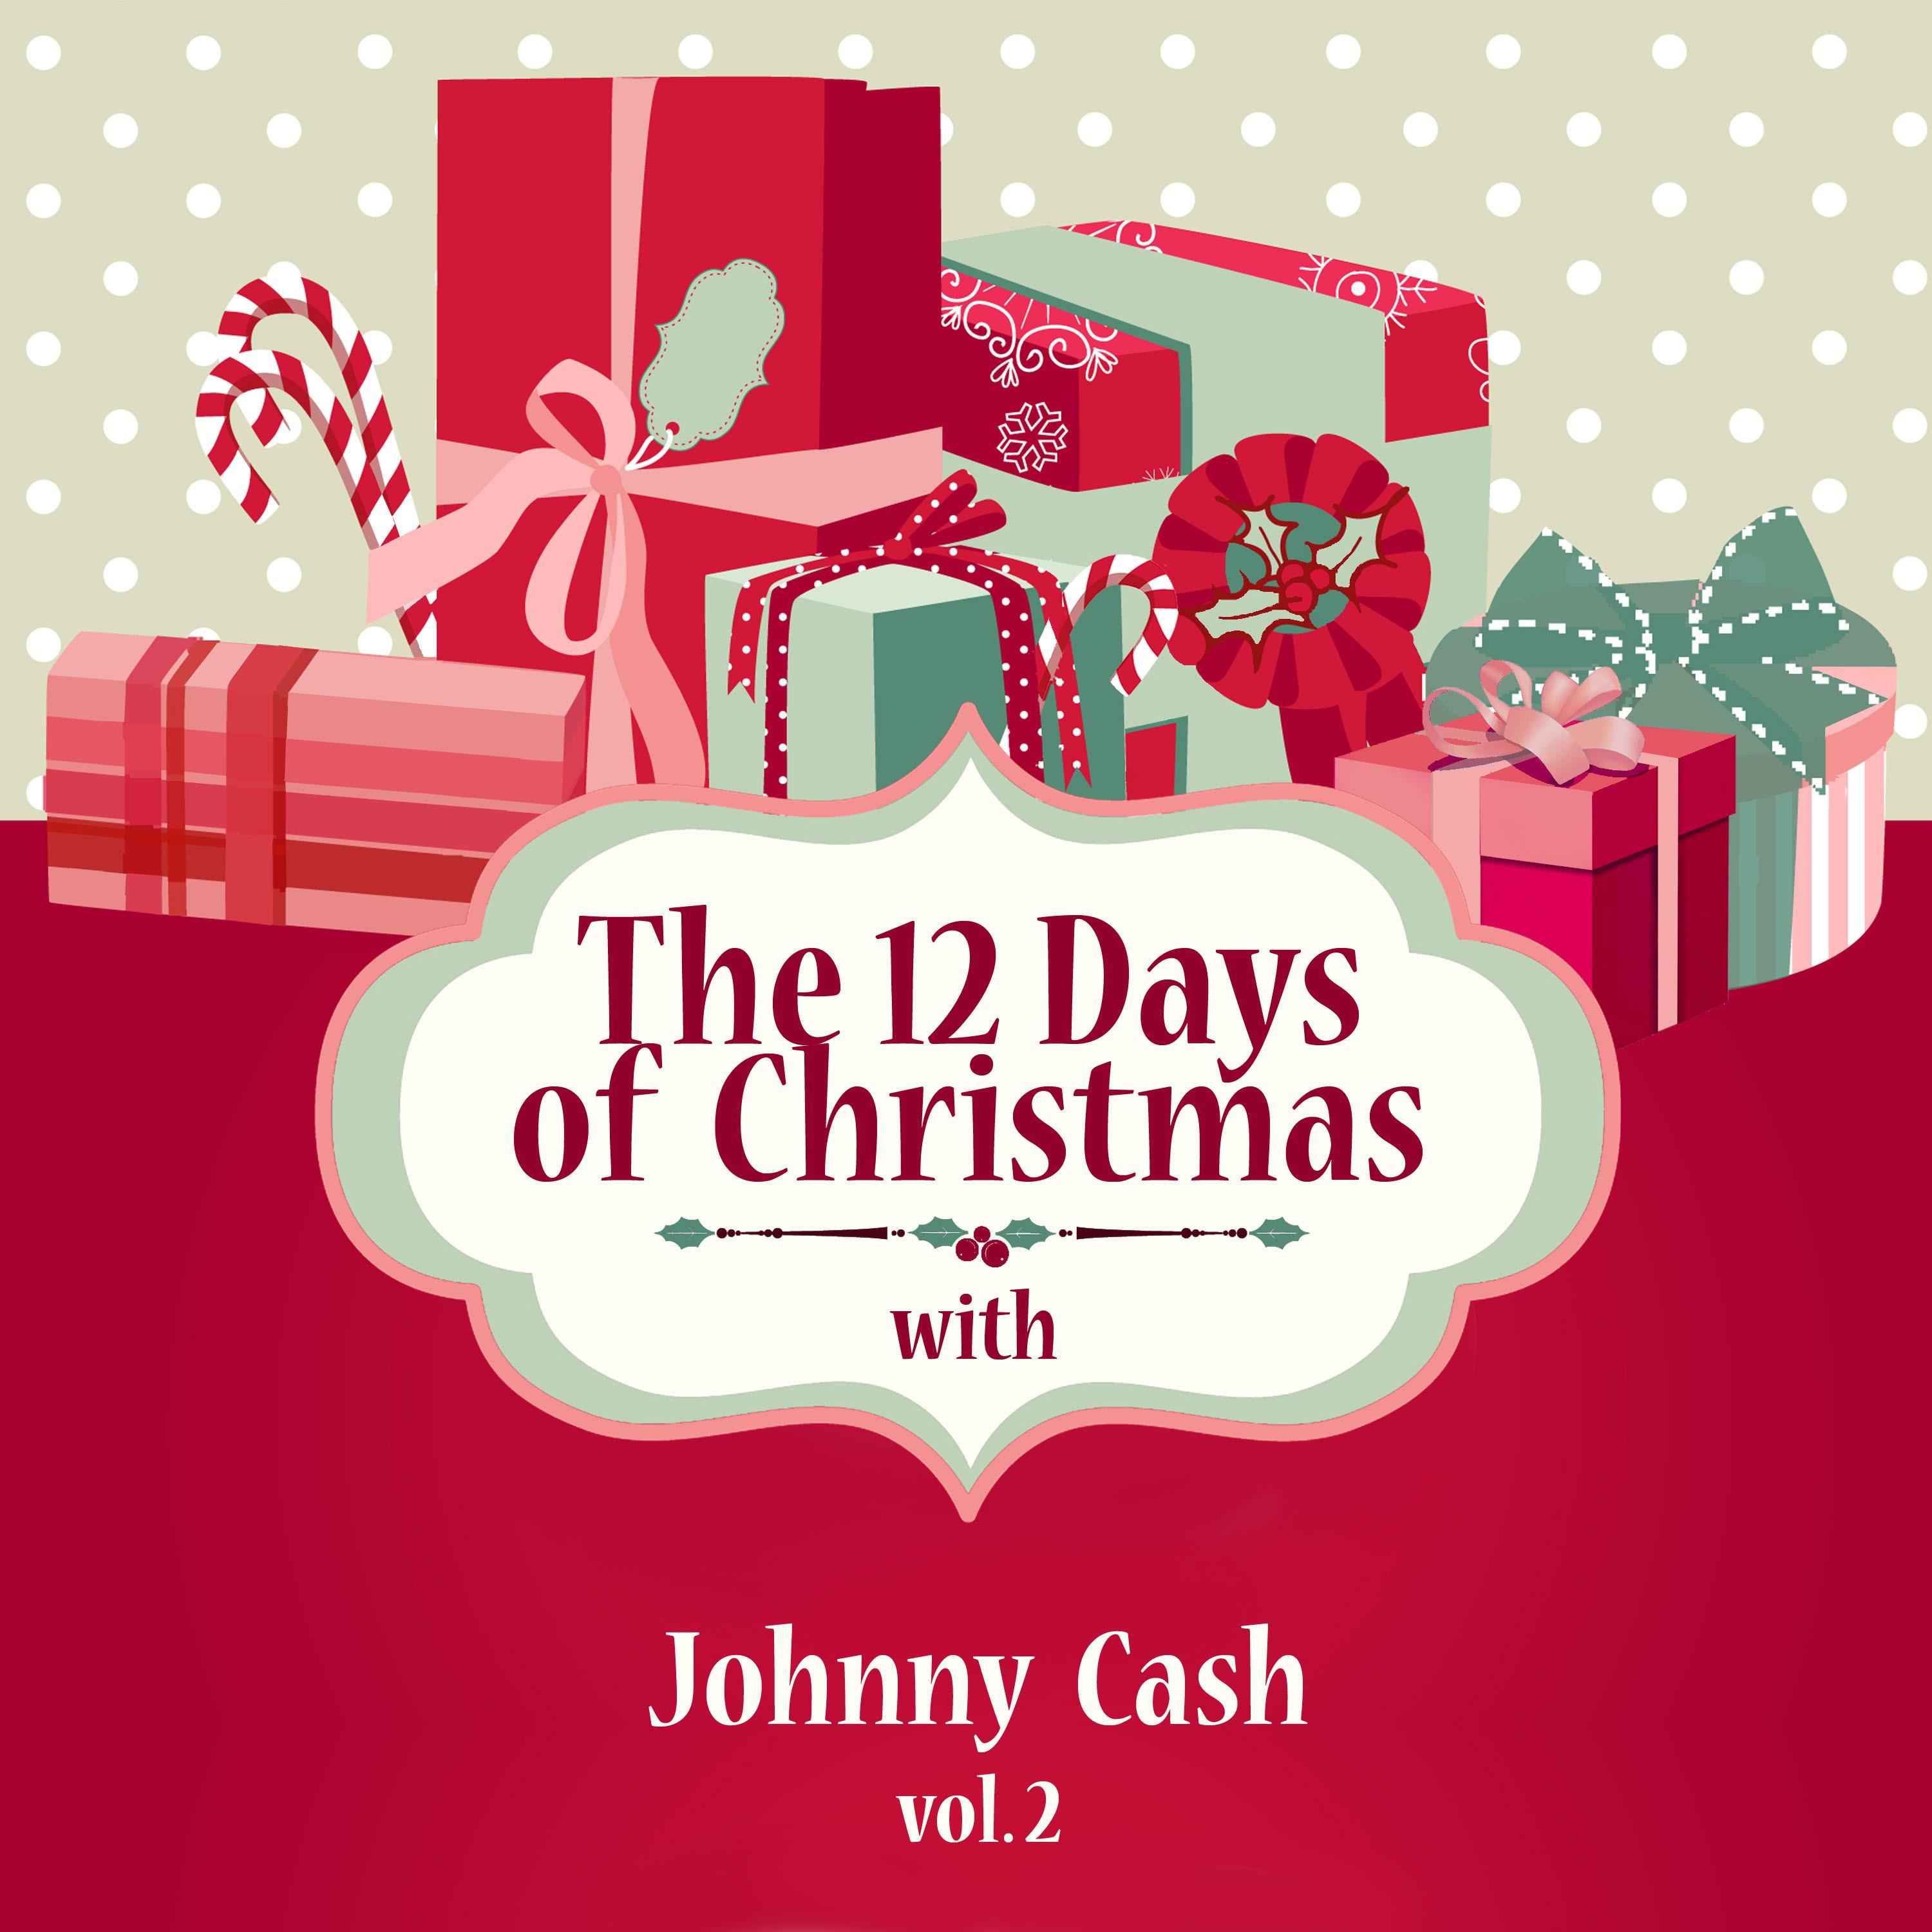 The 12 Days of Christmas with Johnny Cash, Vol. 2